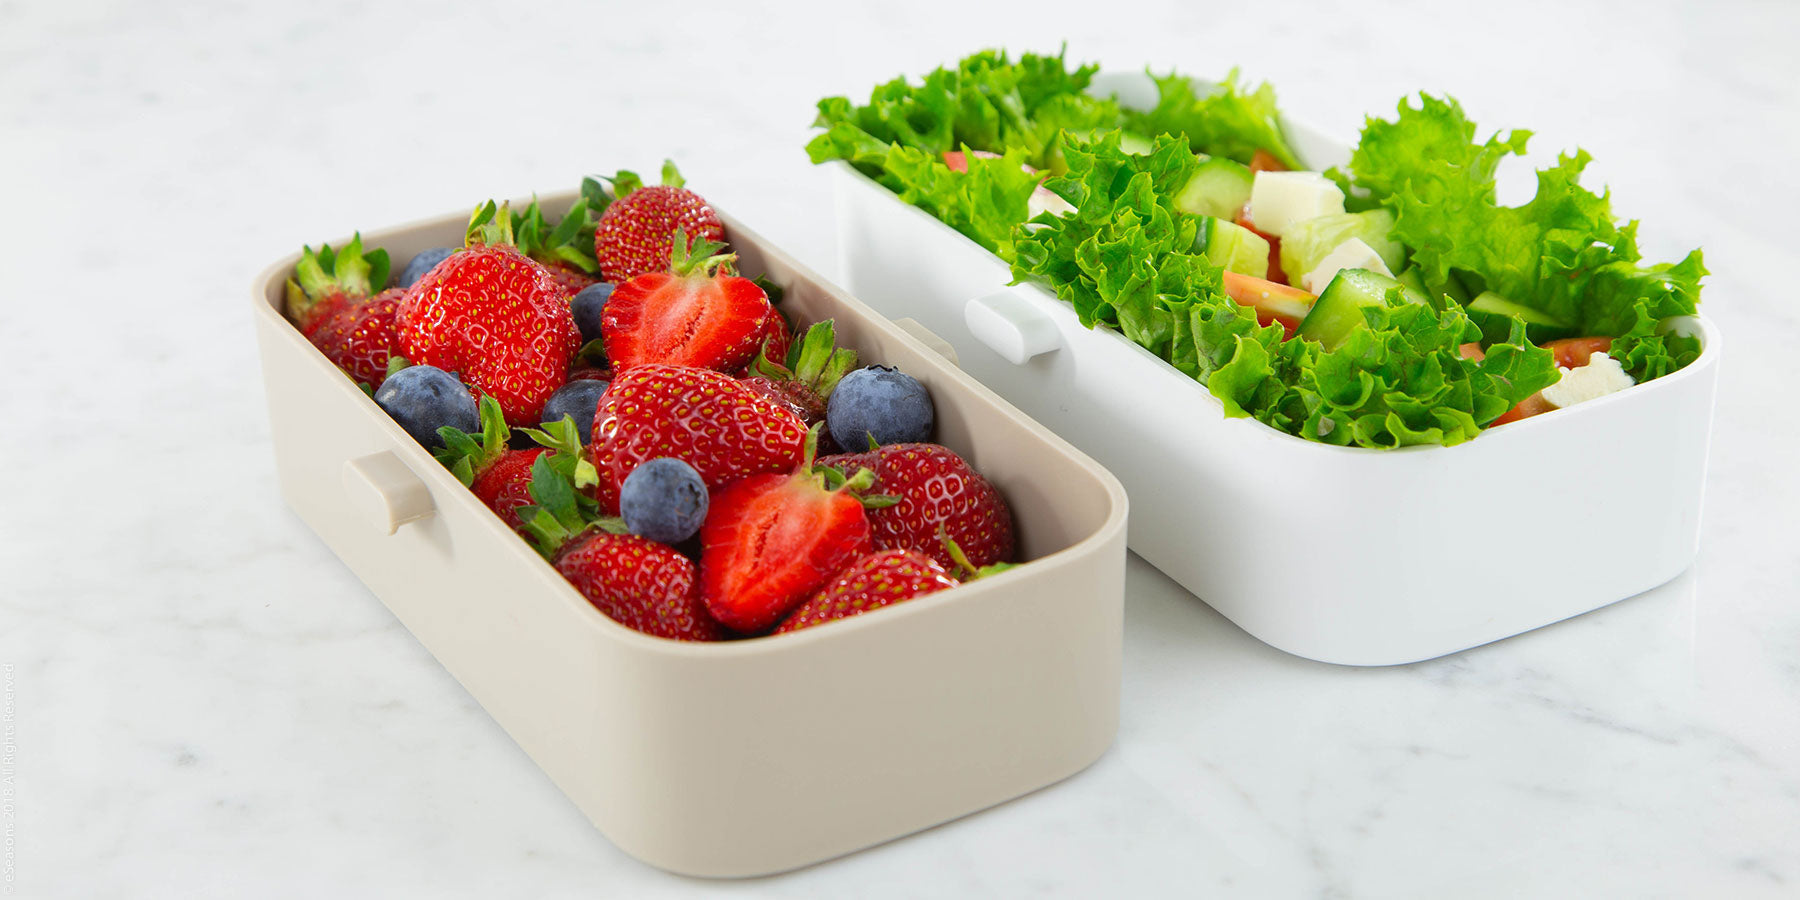 Gorgeous food photography: eSeasons Bento Lunchbox in Warm Grey with appetizing lunch of feta & tomato salad, fruit with strawberries